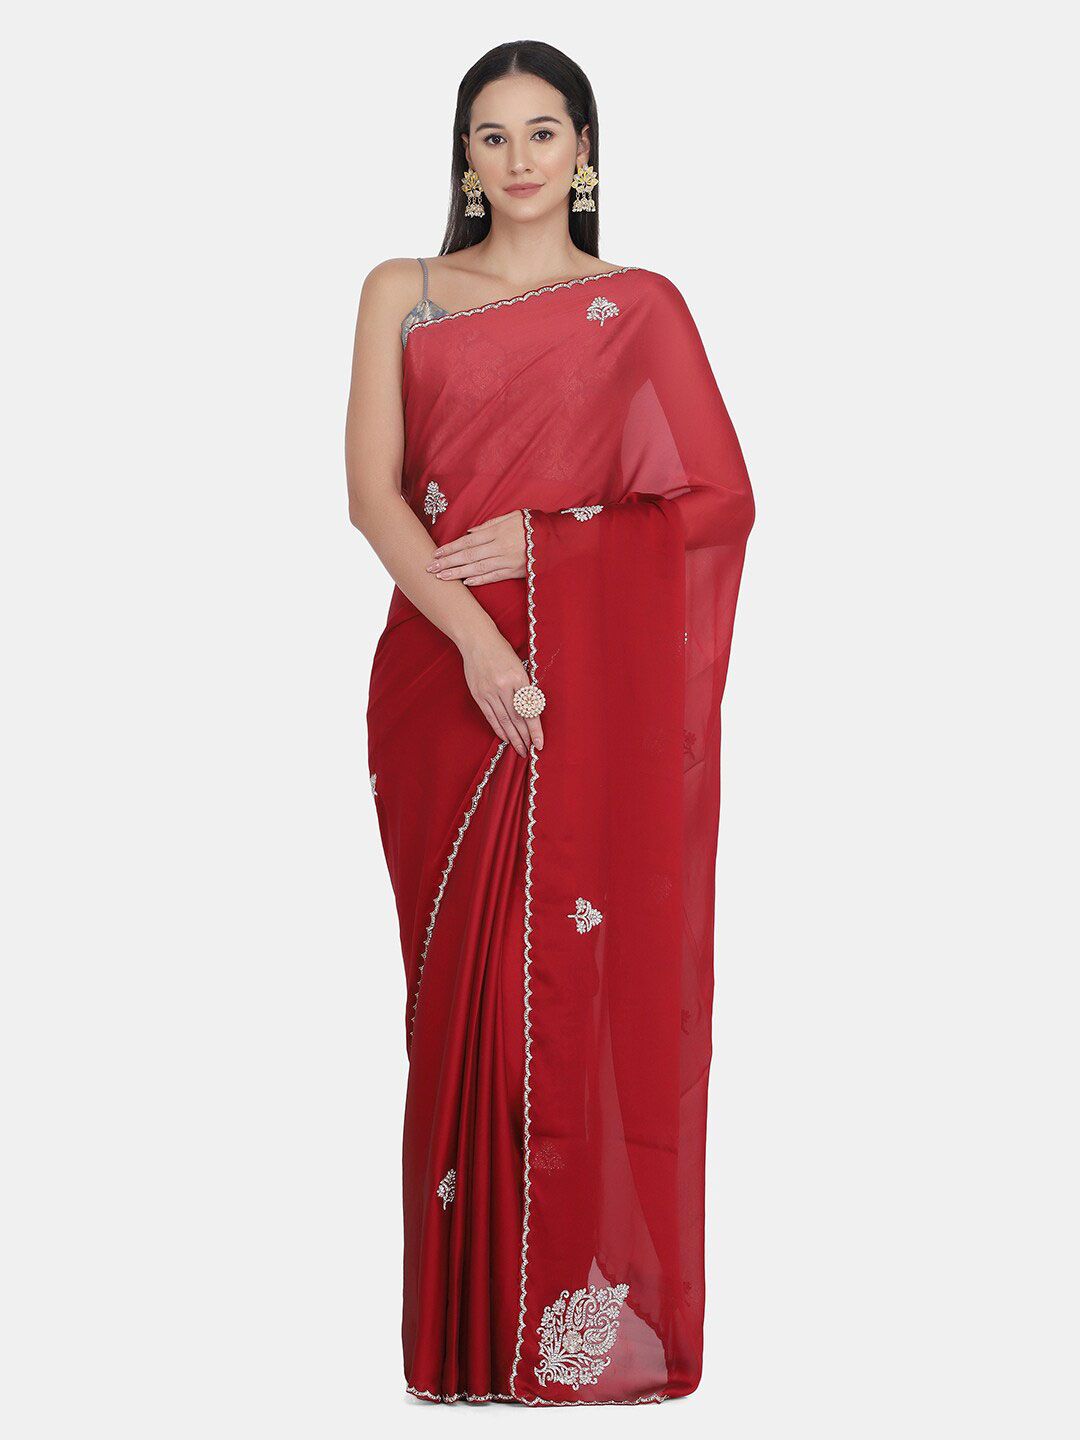 BOMBAY SELECTIONS Maroon & Silver-Toned Embellished Beads and Stones Art Silk Saree Price in India